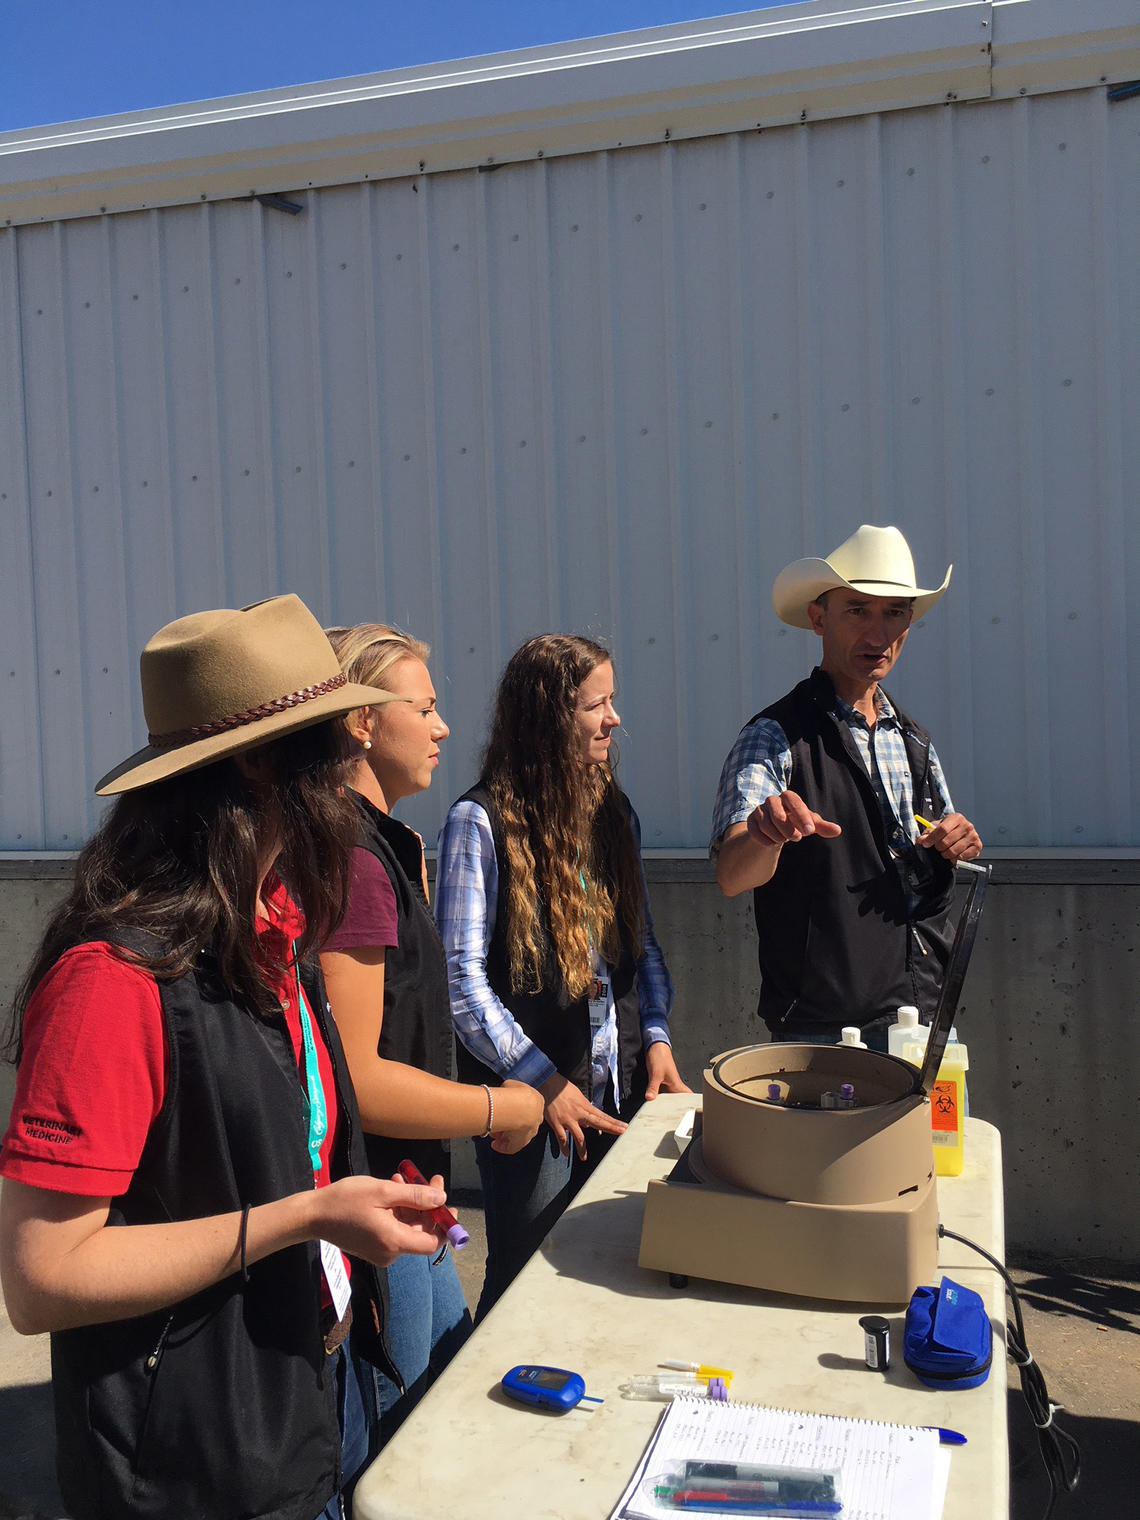 Renaud Léguillette and his team prepare a blood sample at the Calgary Stampede.